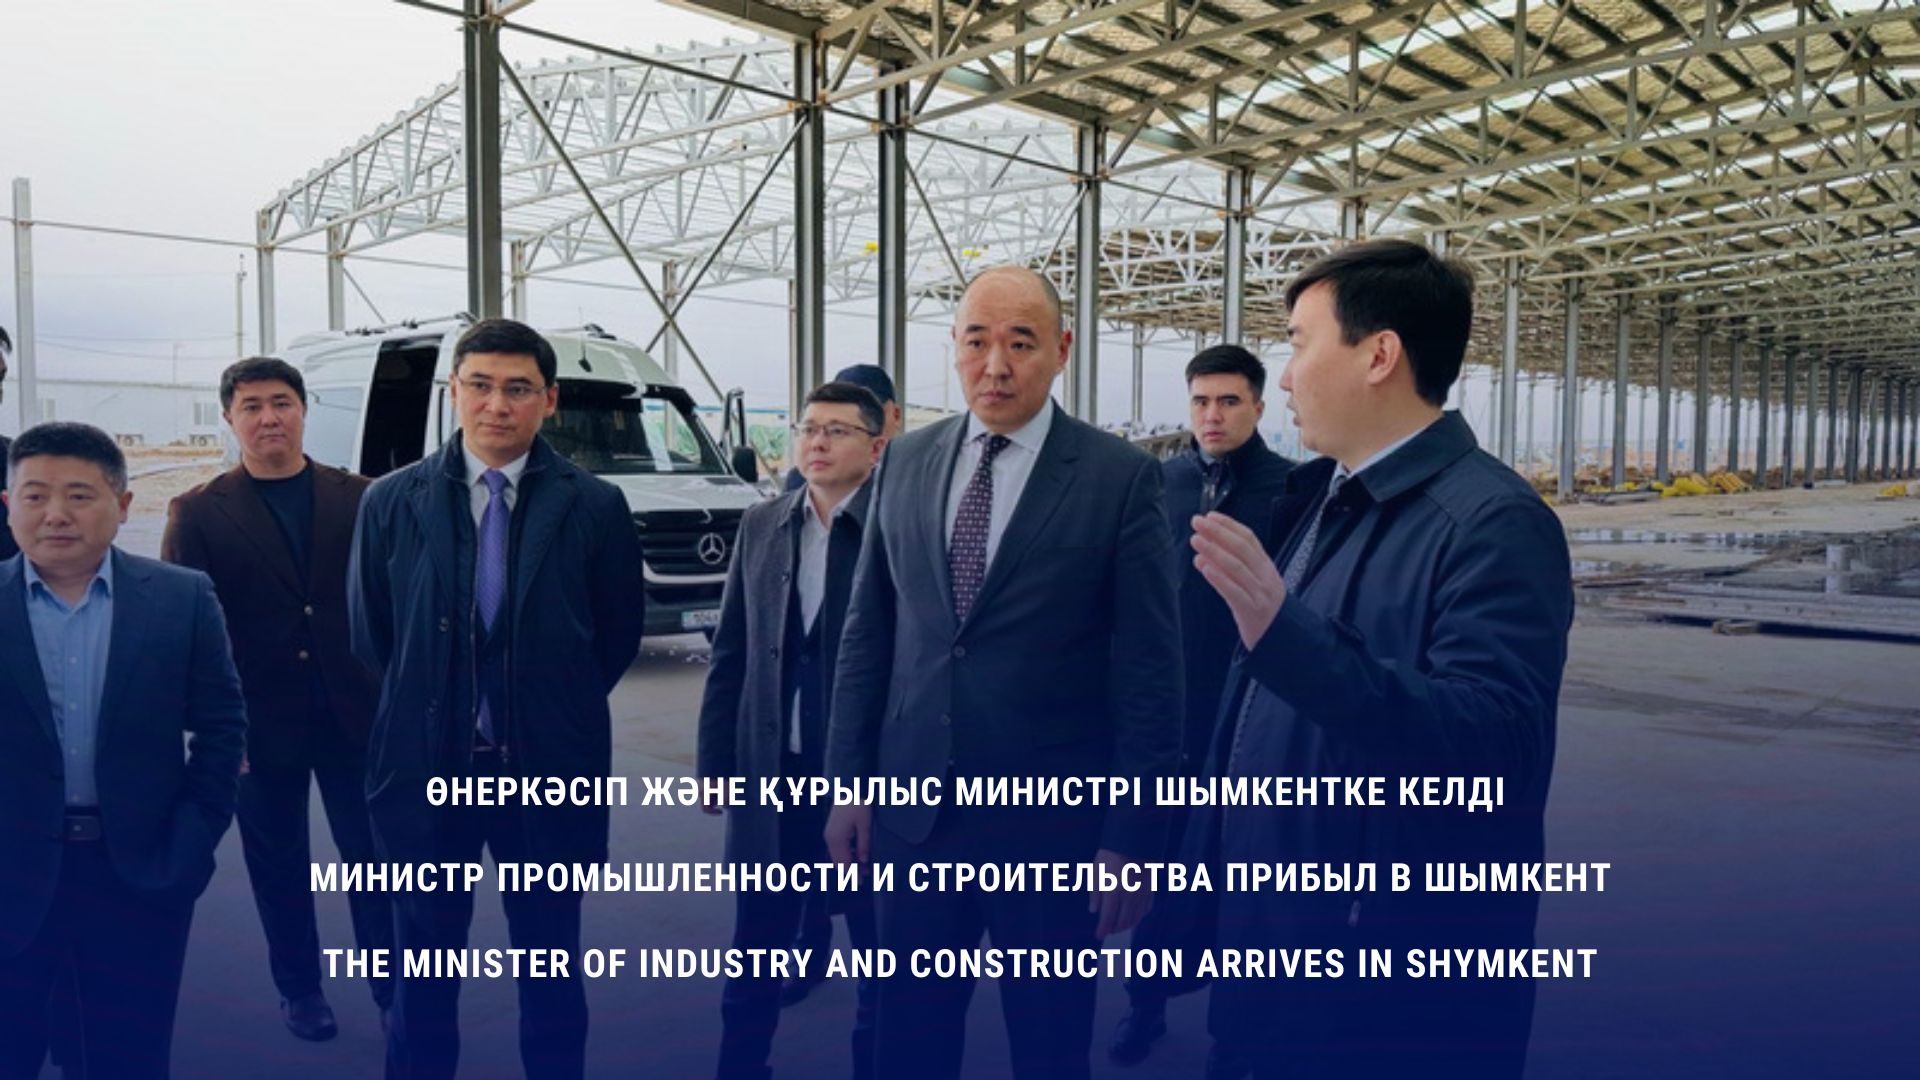 The Minister of Industry and Construction Arrives in Shymkent